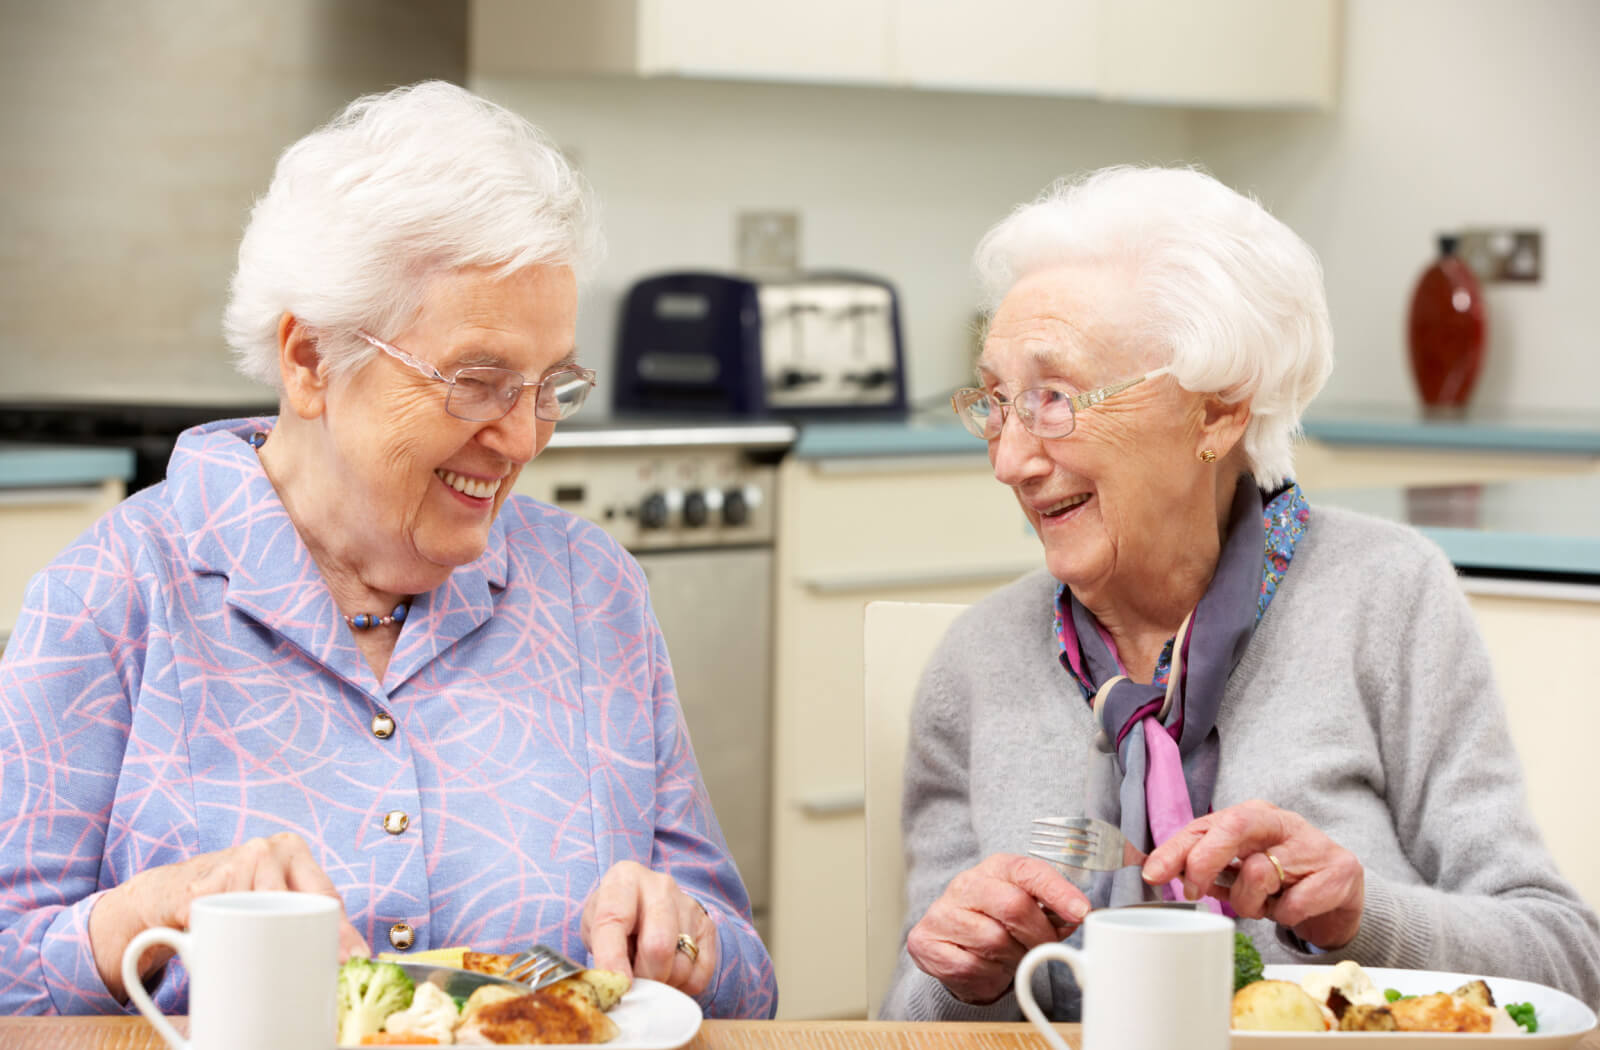 Two older adult women enjoying a healthy meal.